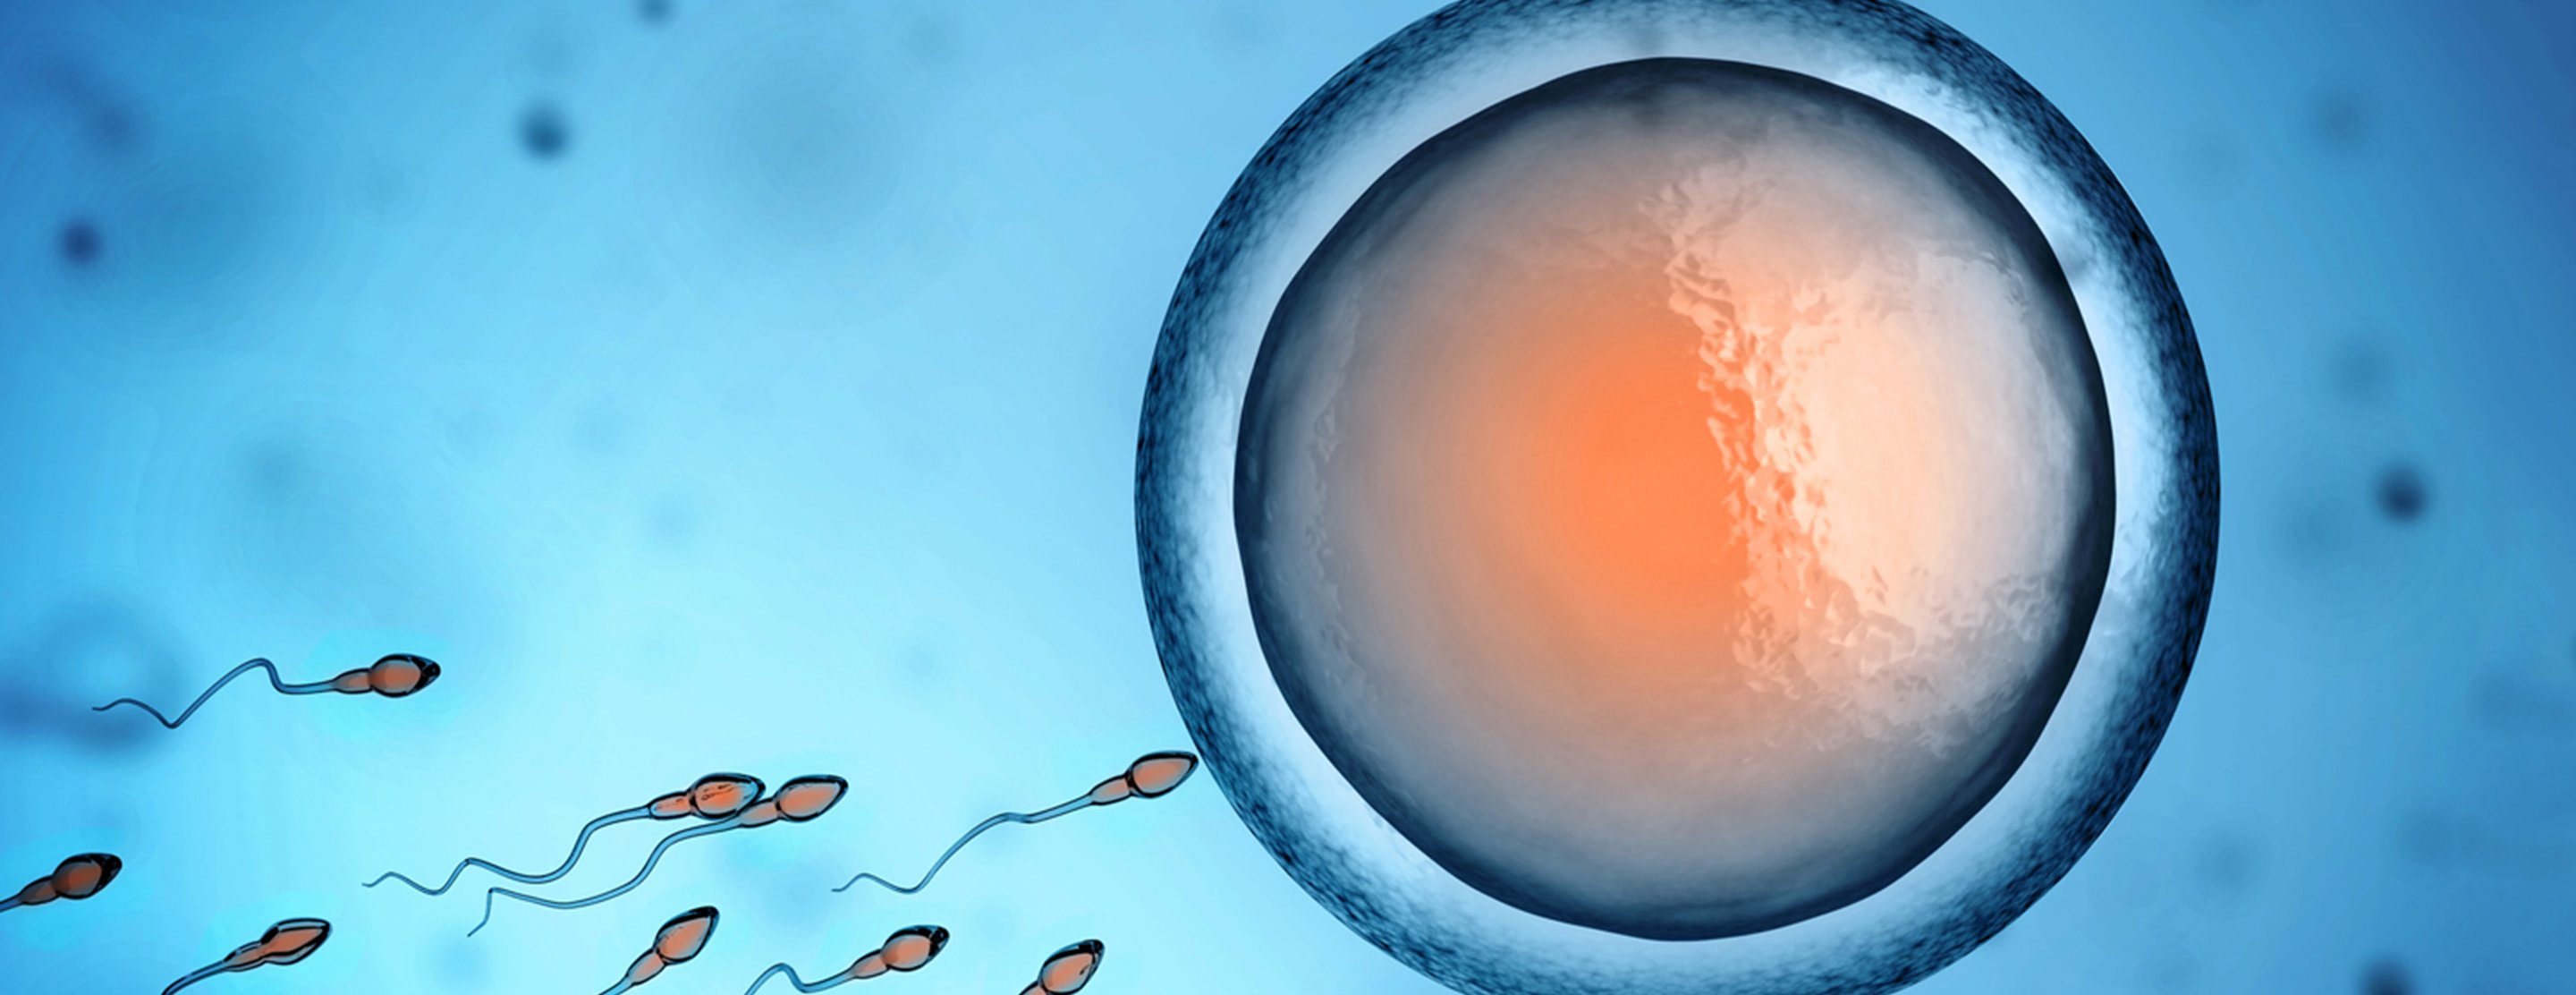 sperm journey to the egg step by step